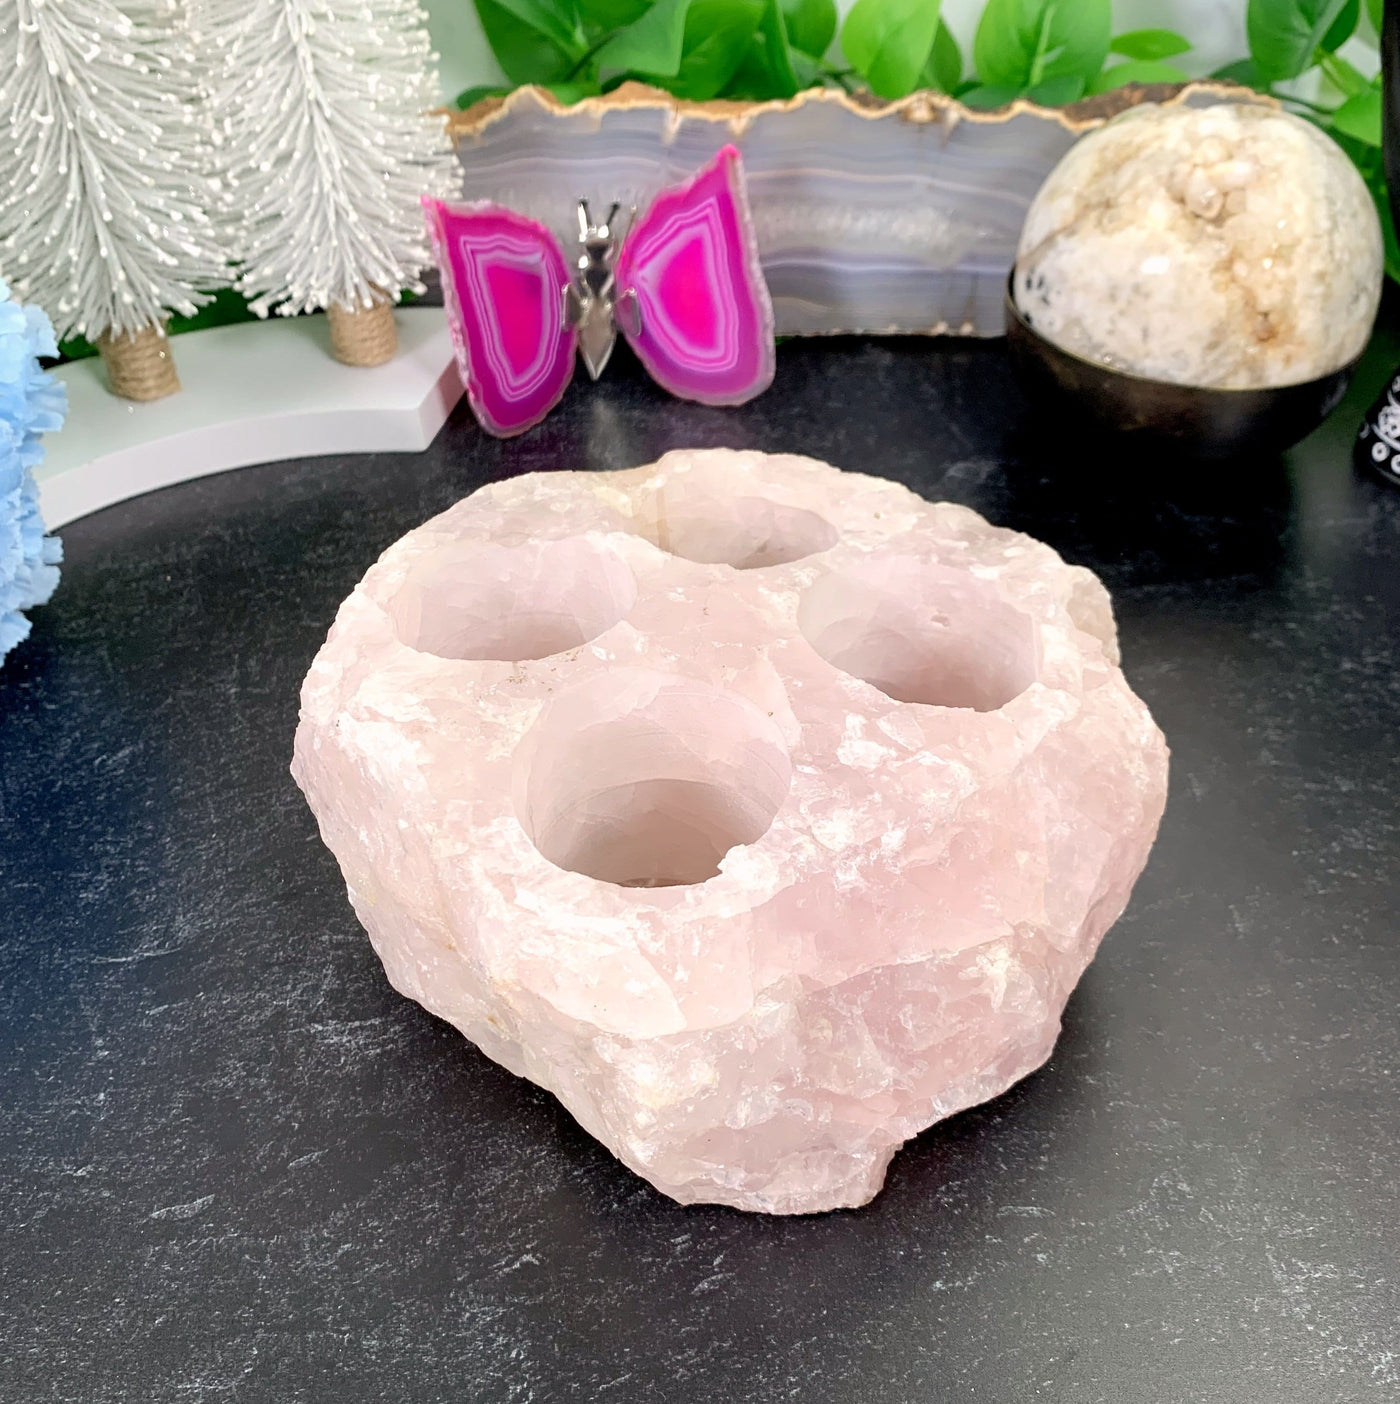 Rose Quartz Candle Holder with various decorations in the background